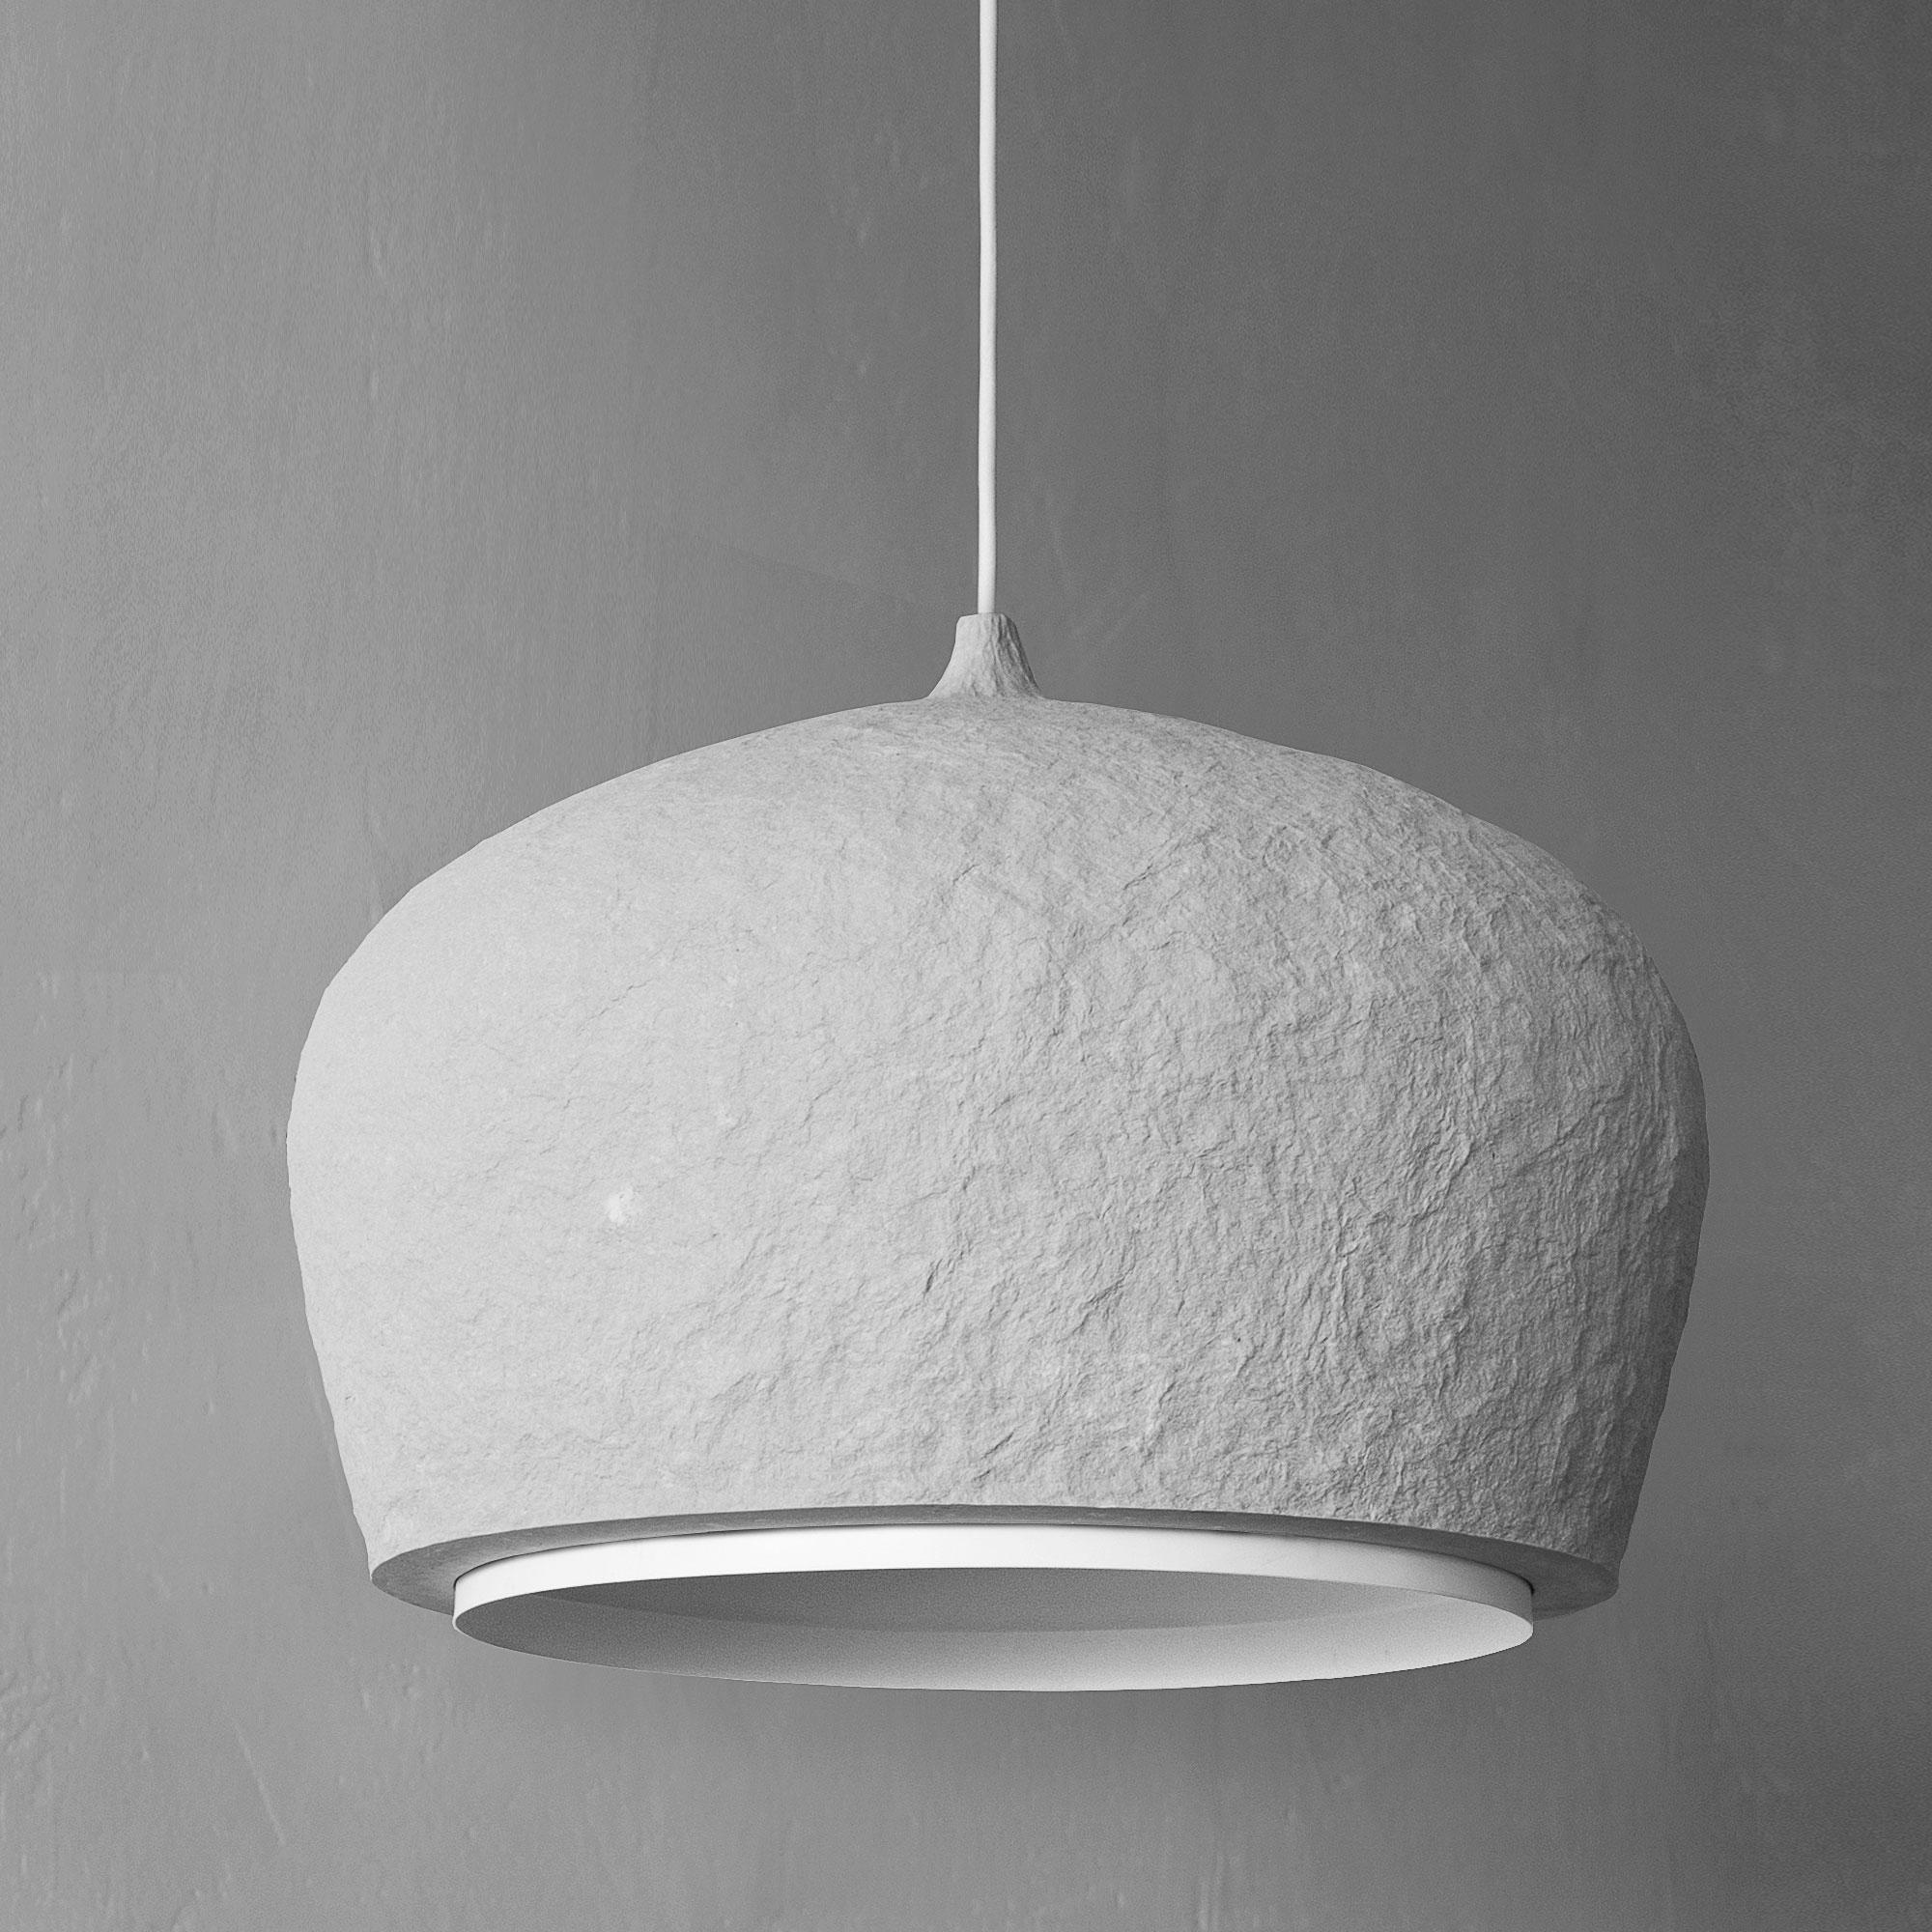 Pendant light “BALANCE”, gray, low.

A combination of natural stone-like rigidity and lightness of a cloud. These handmade ceiling lights have a unique character and bring a sense of harmony. The ceiling lights are a versatile fit for spaces of